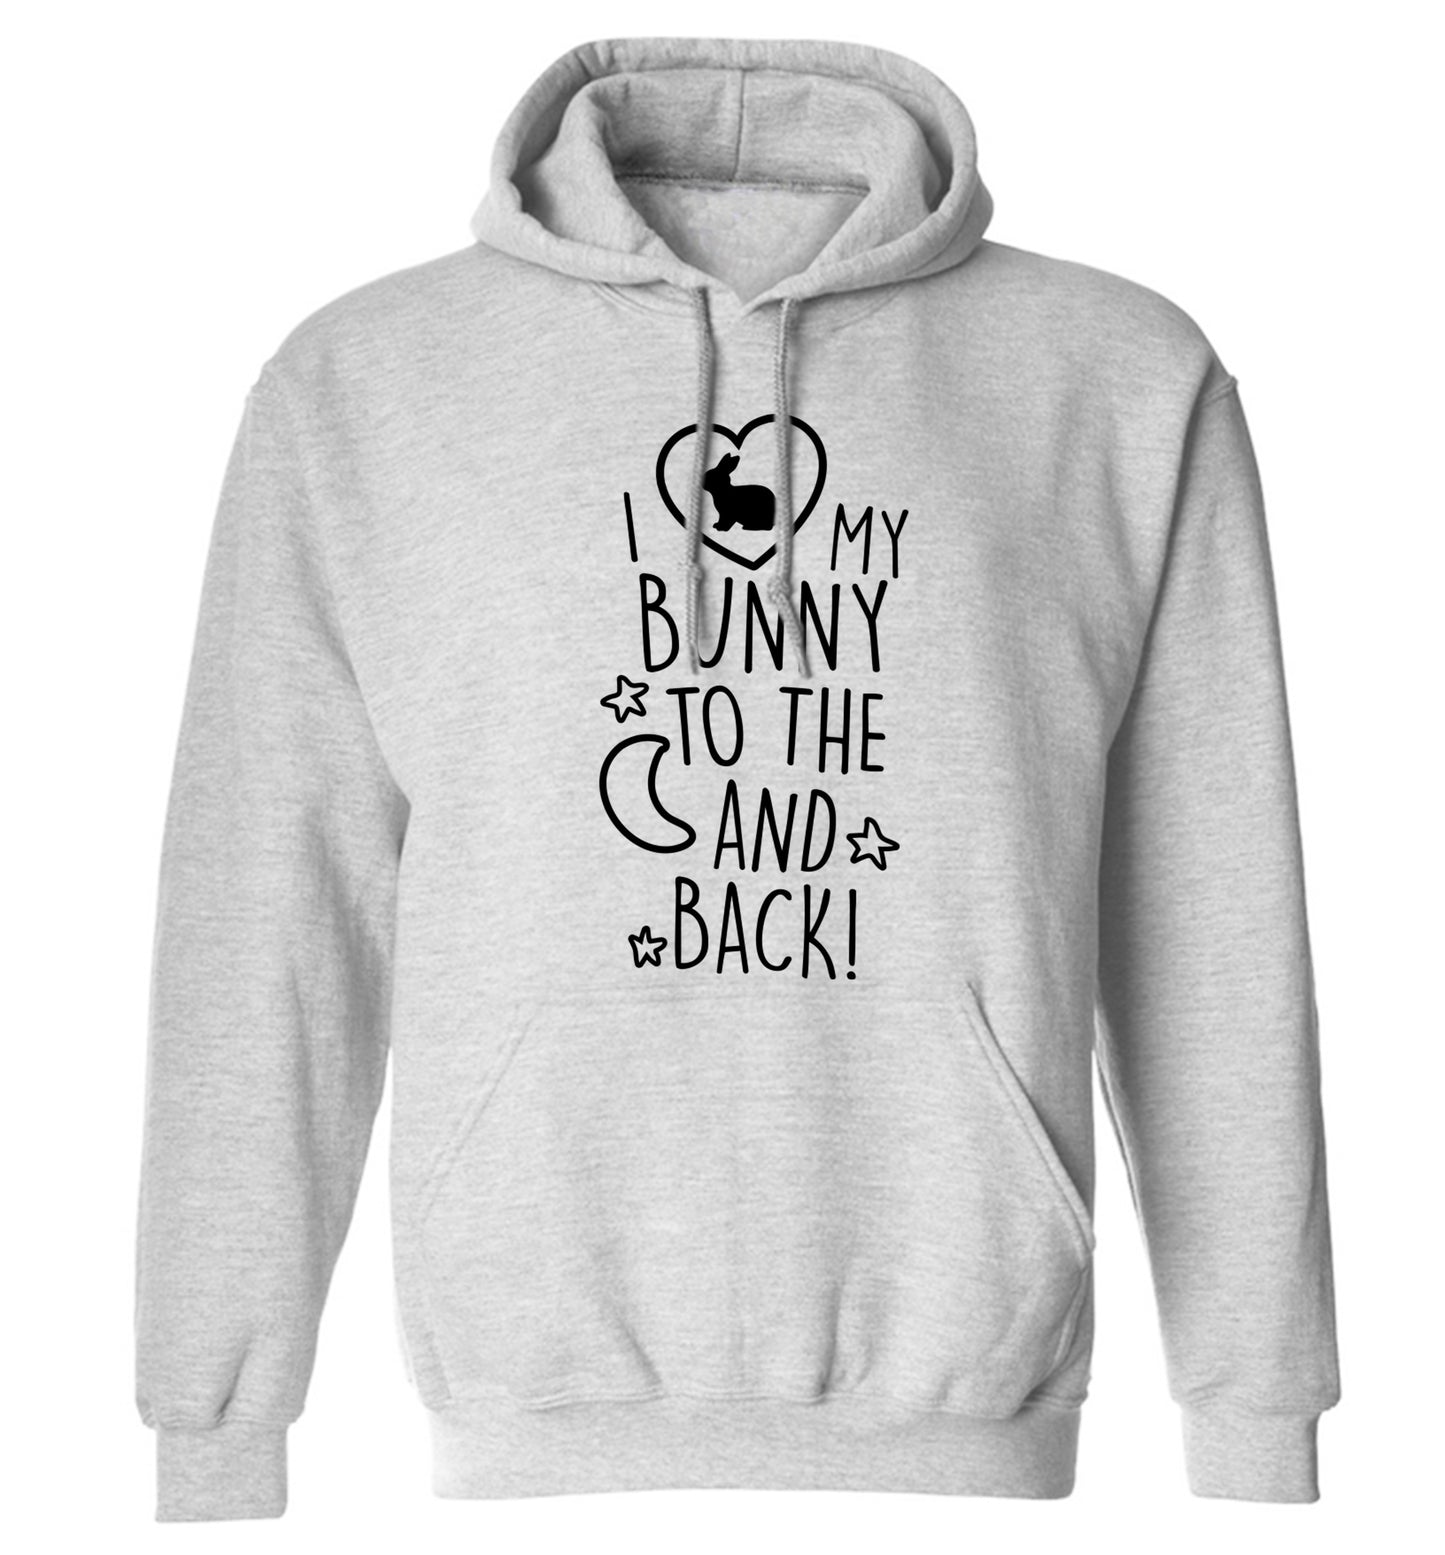 I love my bunny to the moon and back adults unisex grey hoodie 2XL